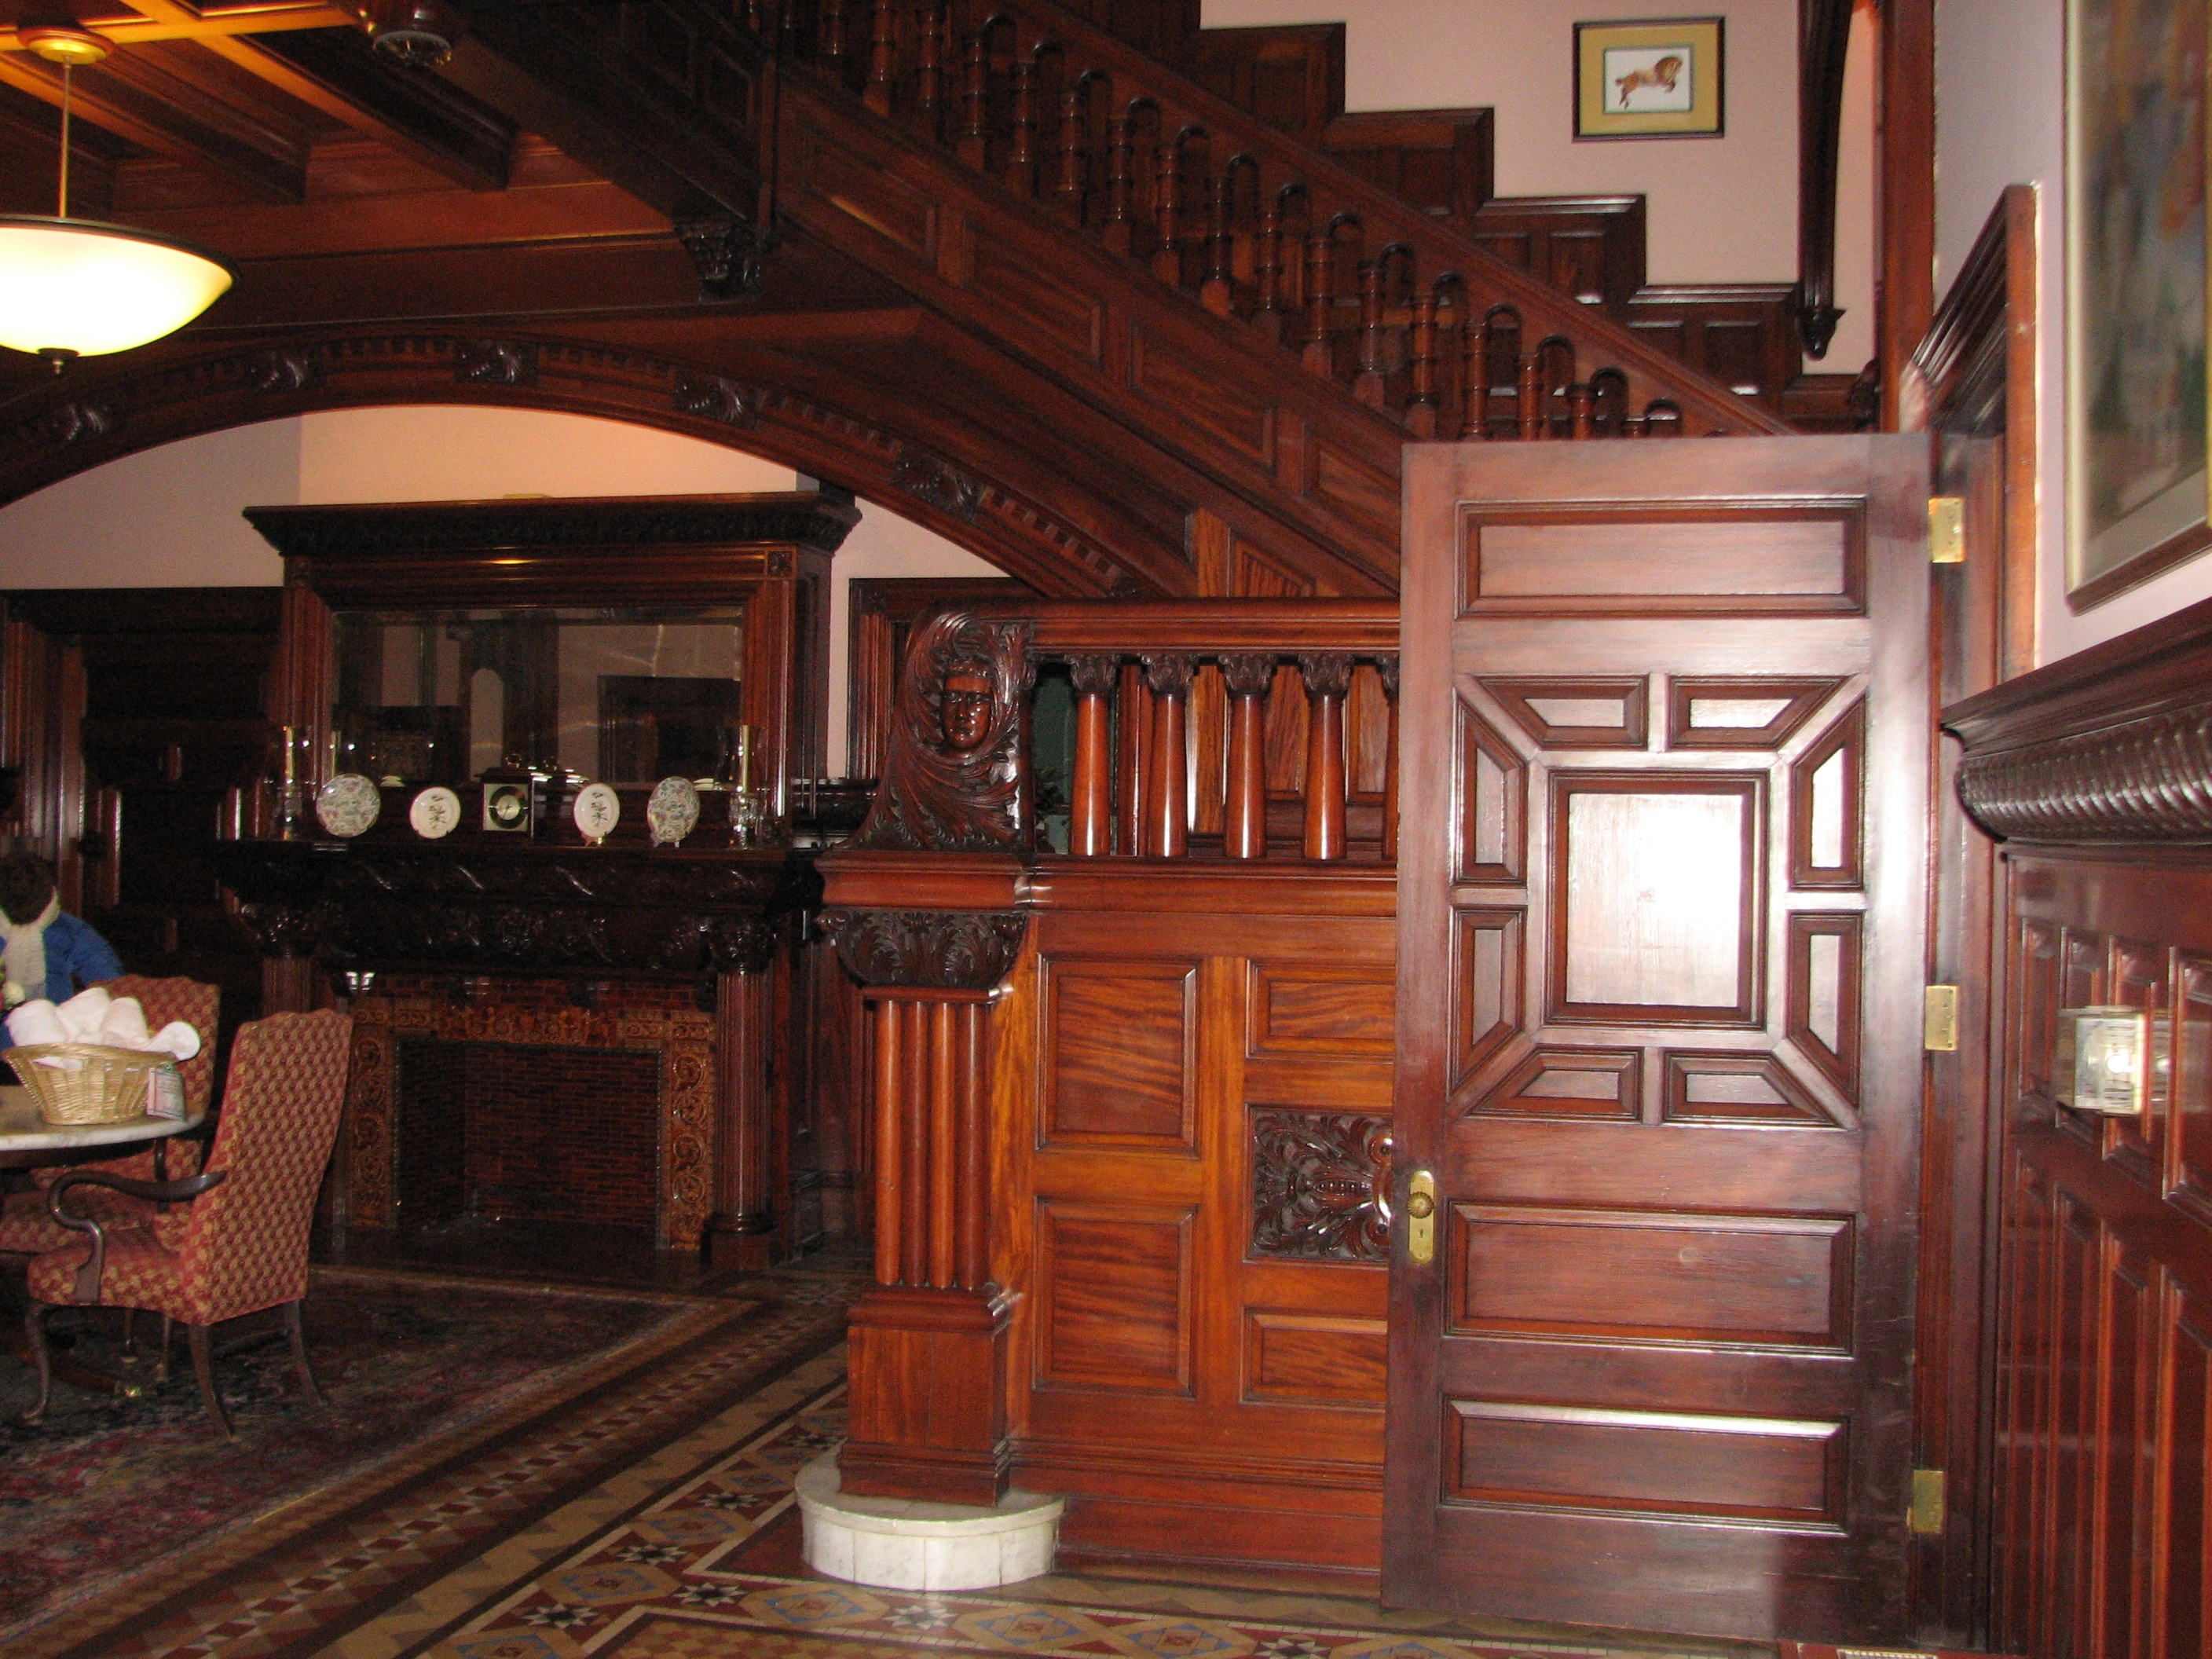 The elaborate interior of the house includes a grand oak staircase, tiled fireplaces, and parquet floors.